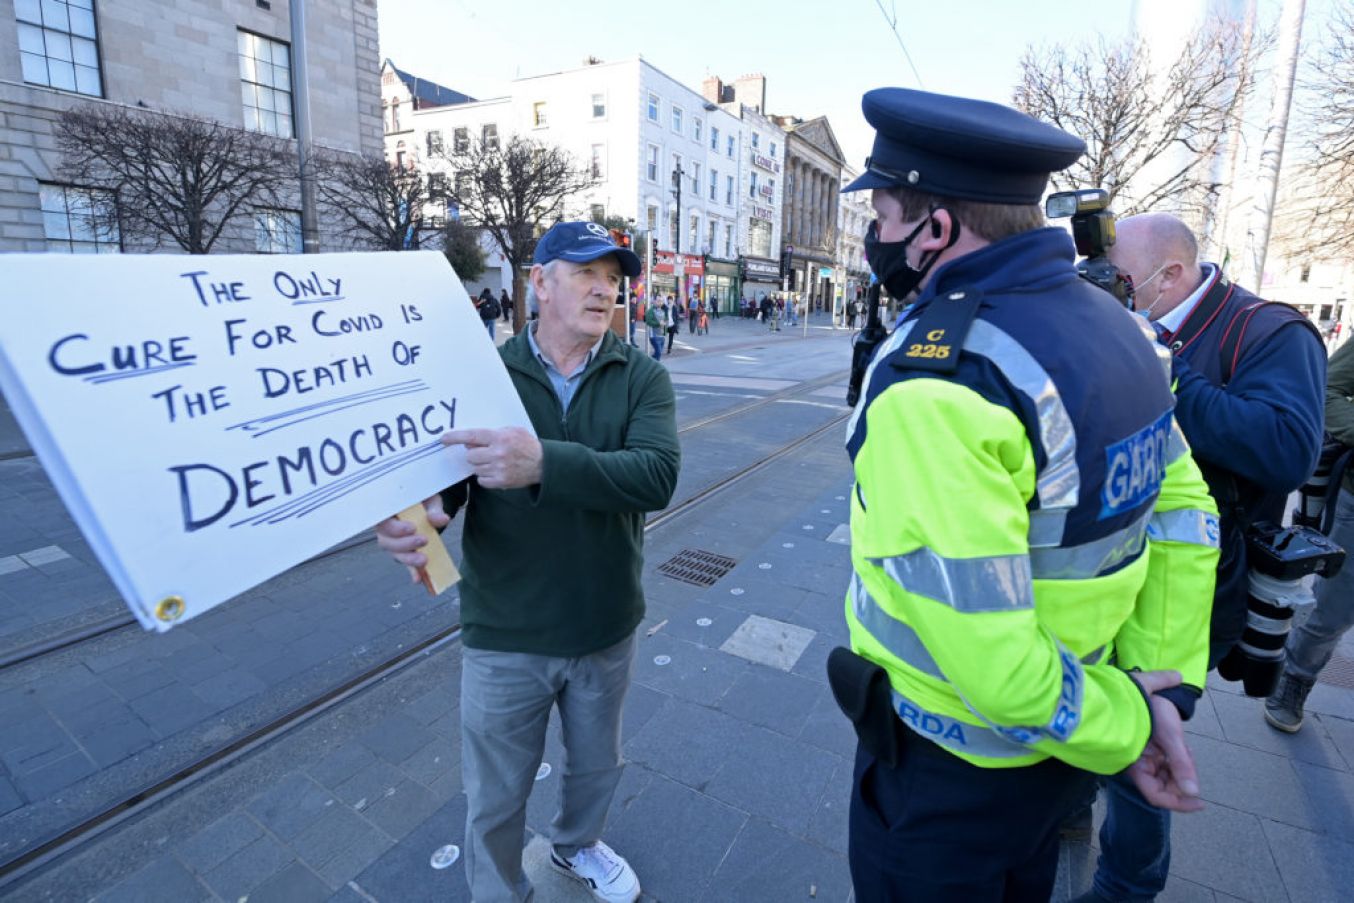 A Garda Speaks With A Man Holding Up A Banner As Anti-Lockdown Protesters Demonstrate On St Patrick's Day In Dublin. Photo: Charles Mcquillan/Getty